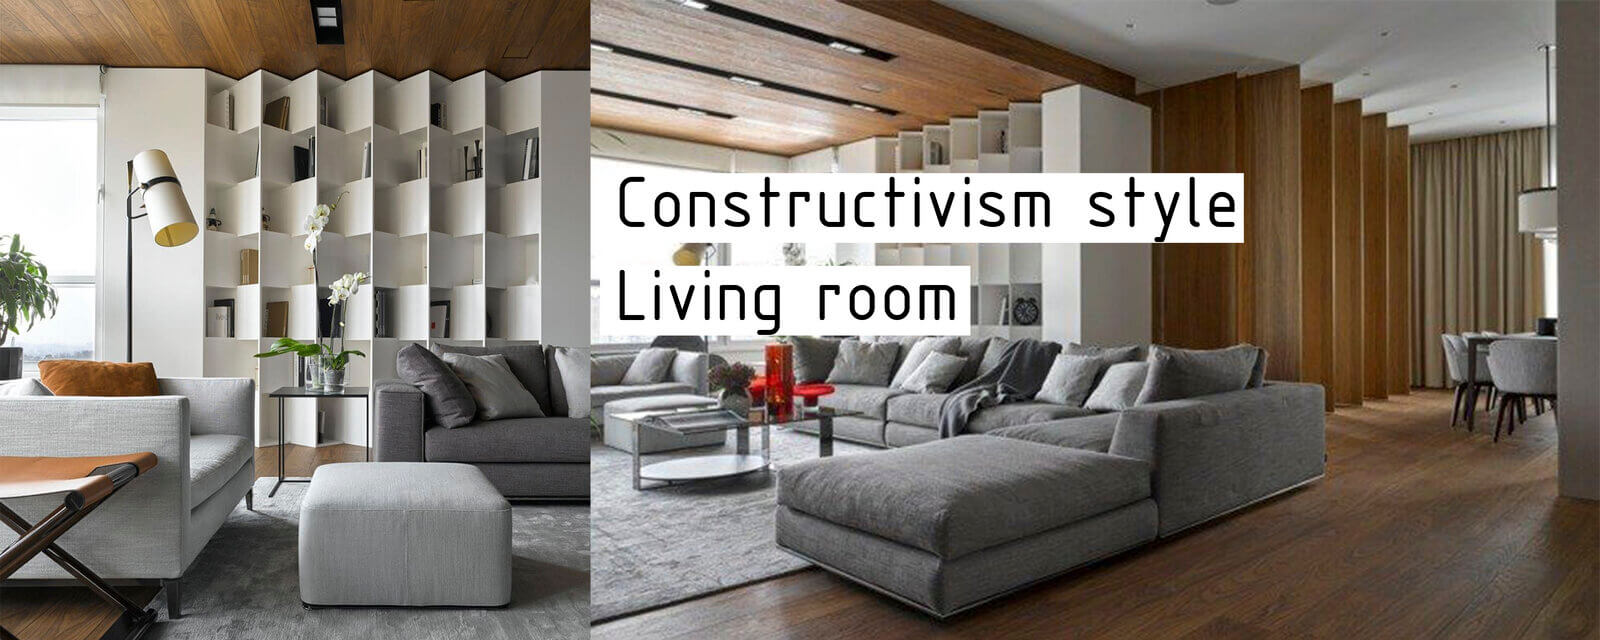 Constructivism Style | Living Room